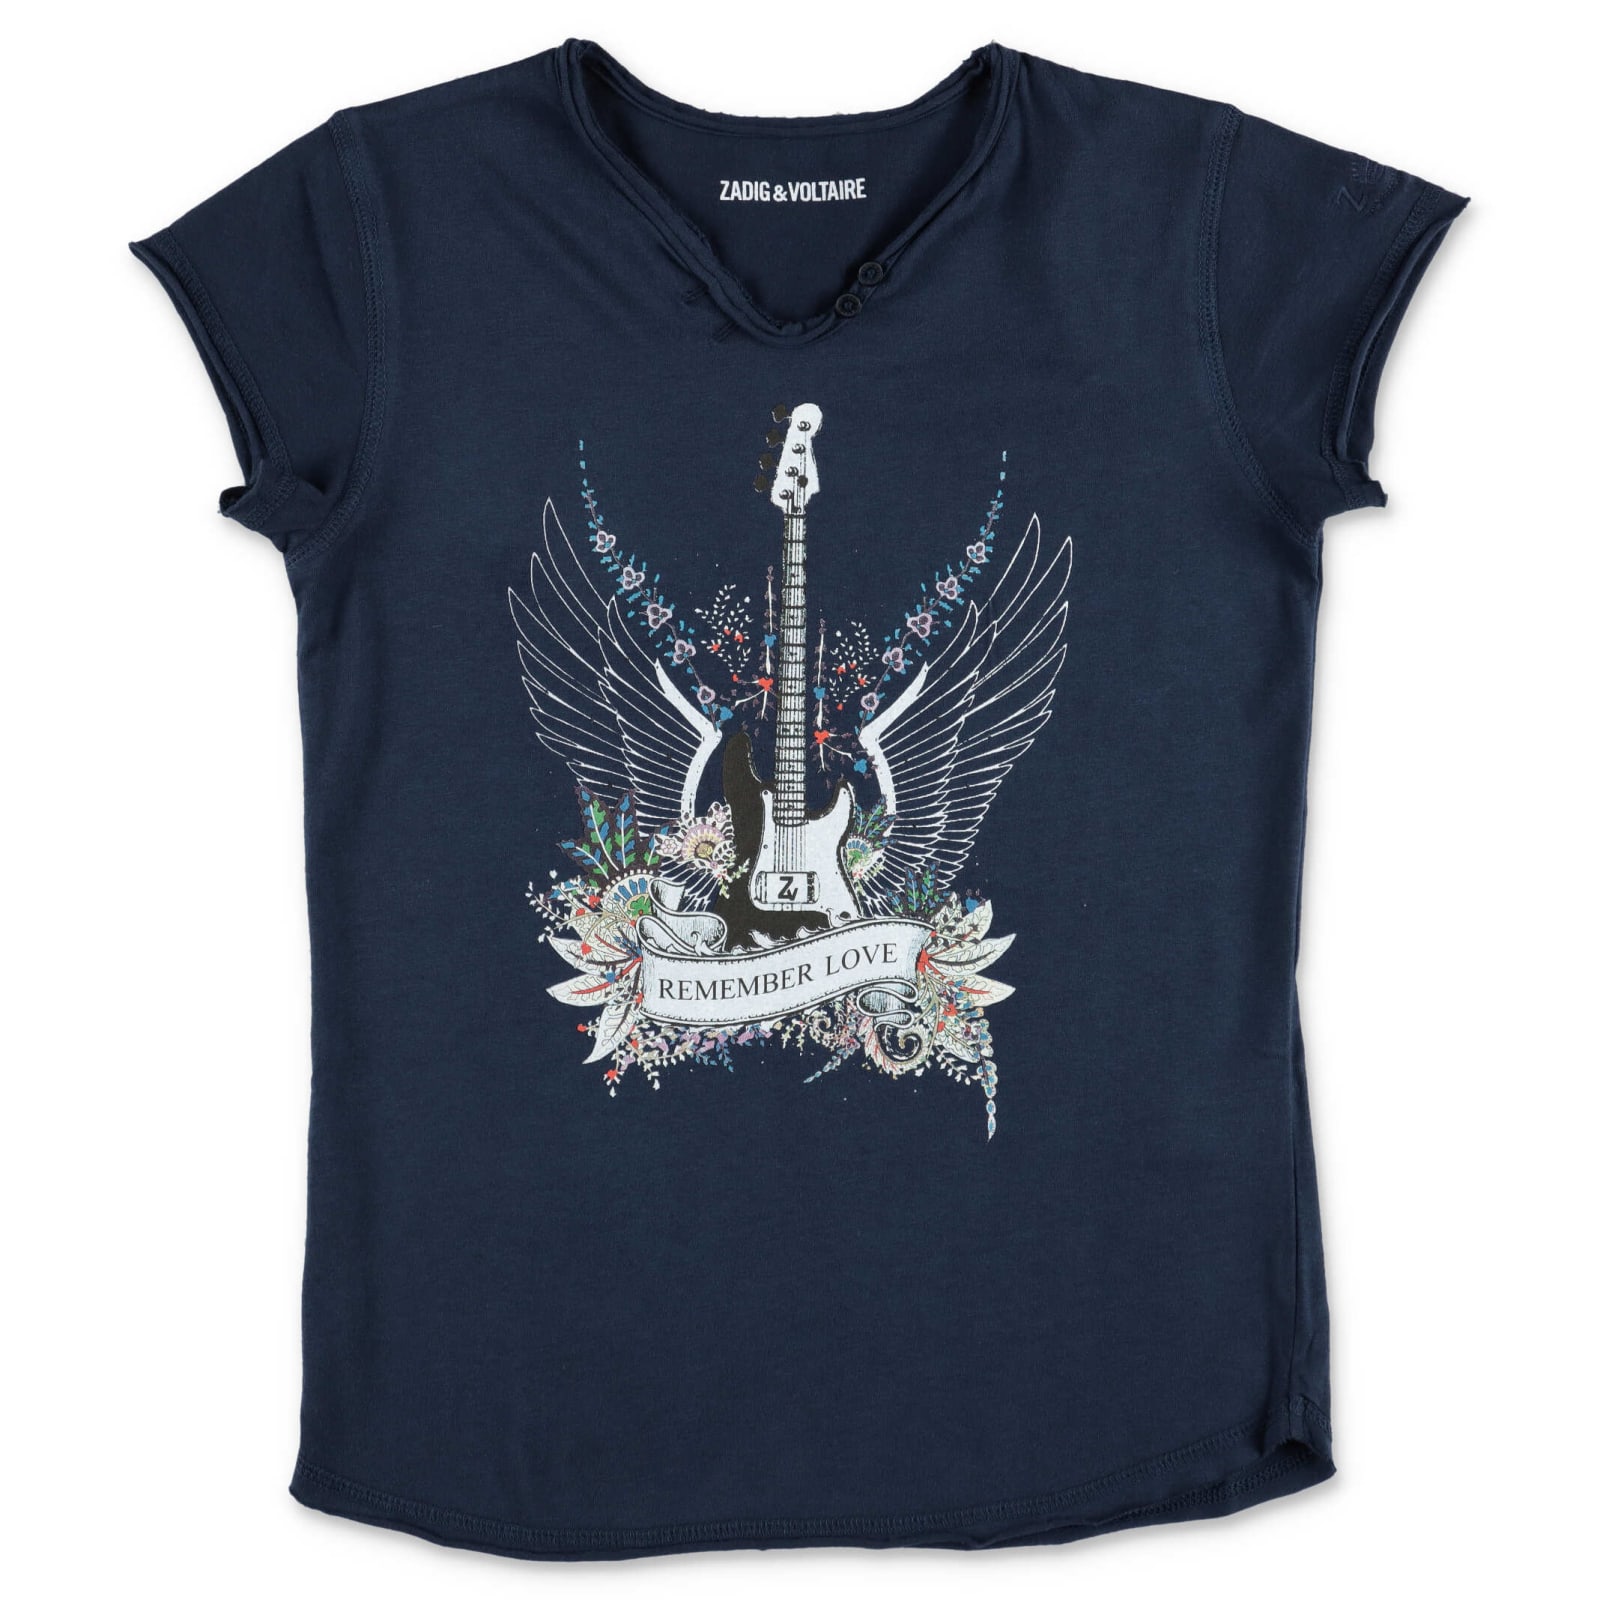 Zadig & Voltaire T-shirt Blu Navy In Jersey Di Cotone